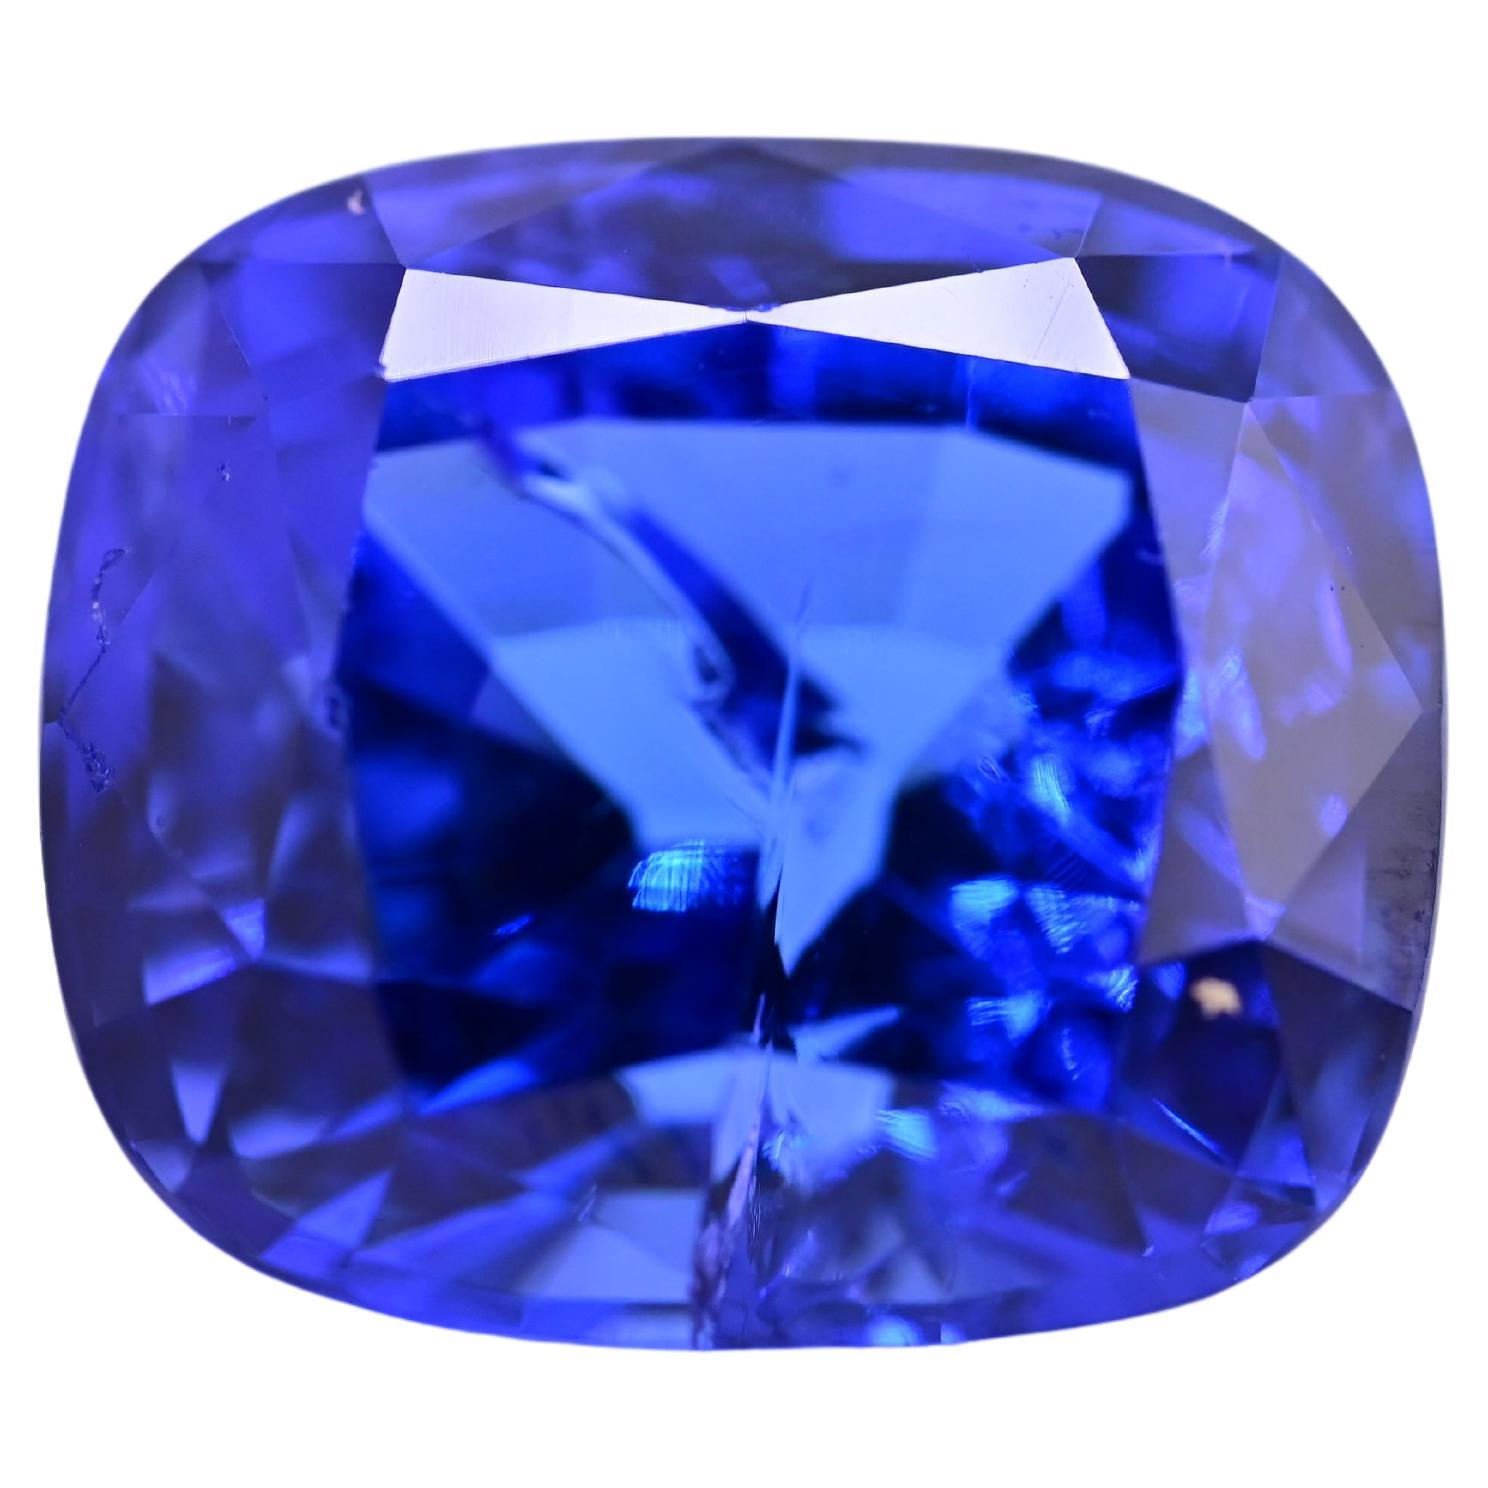 Exceptional Vivid Tanzanite Loose Stone 11.01 Carats GIA Certified